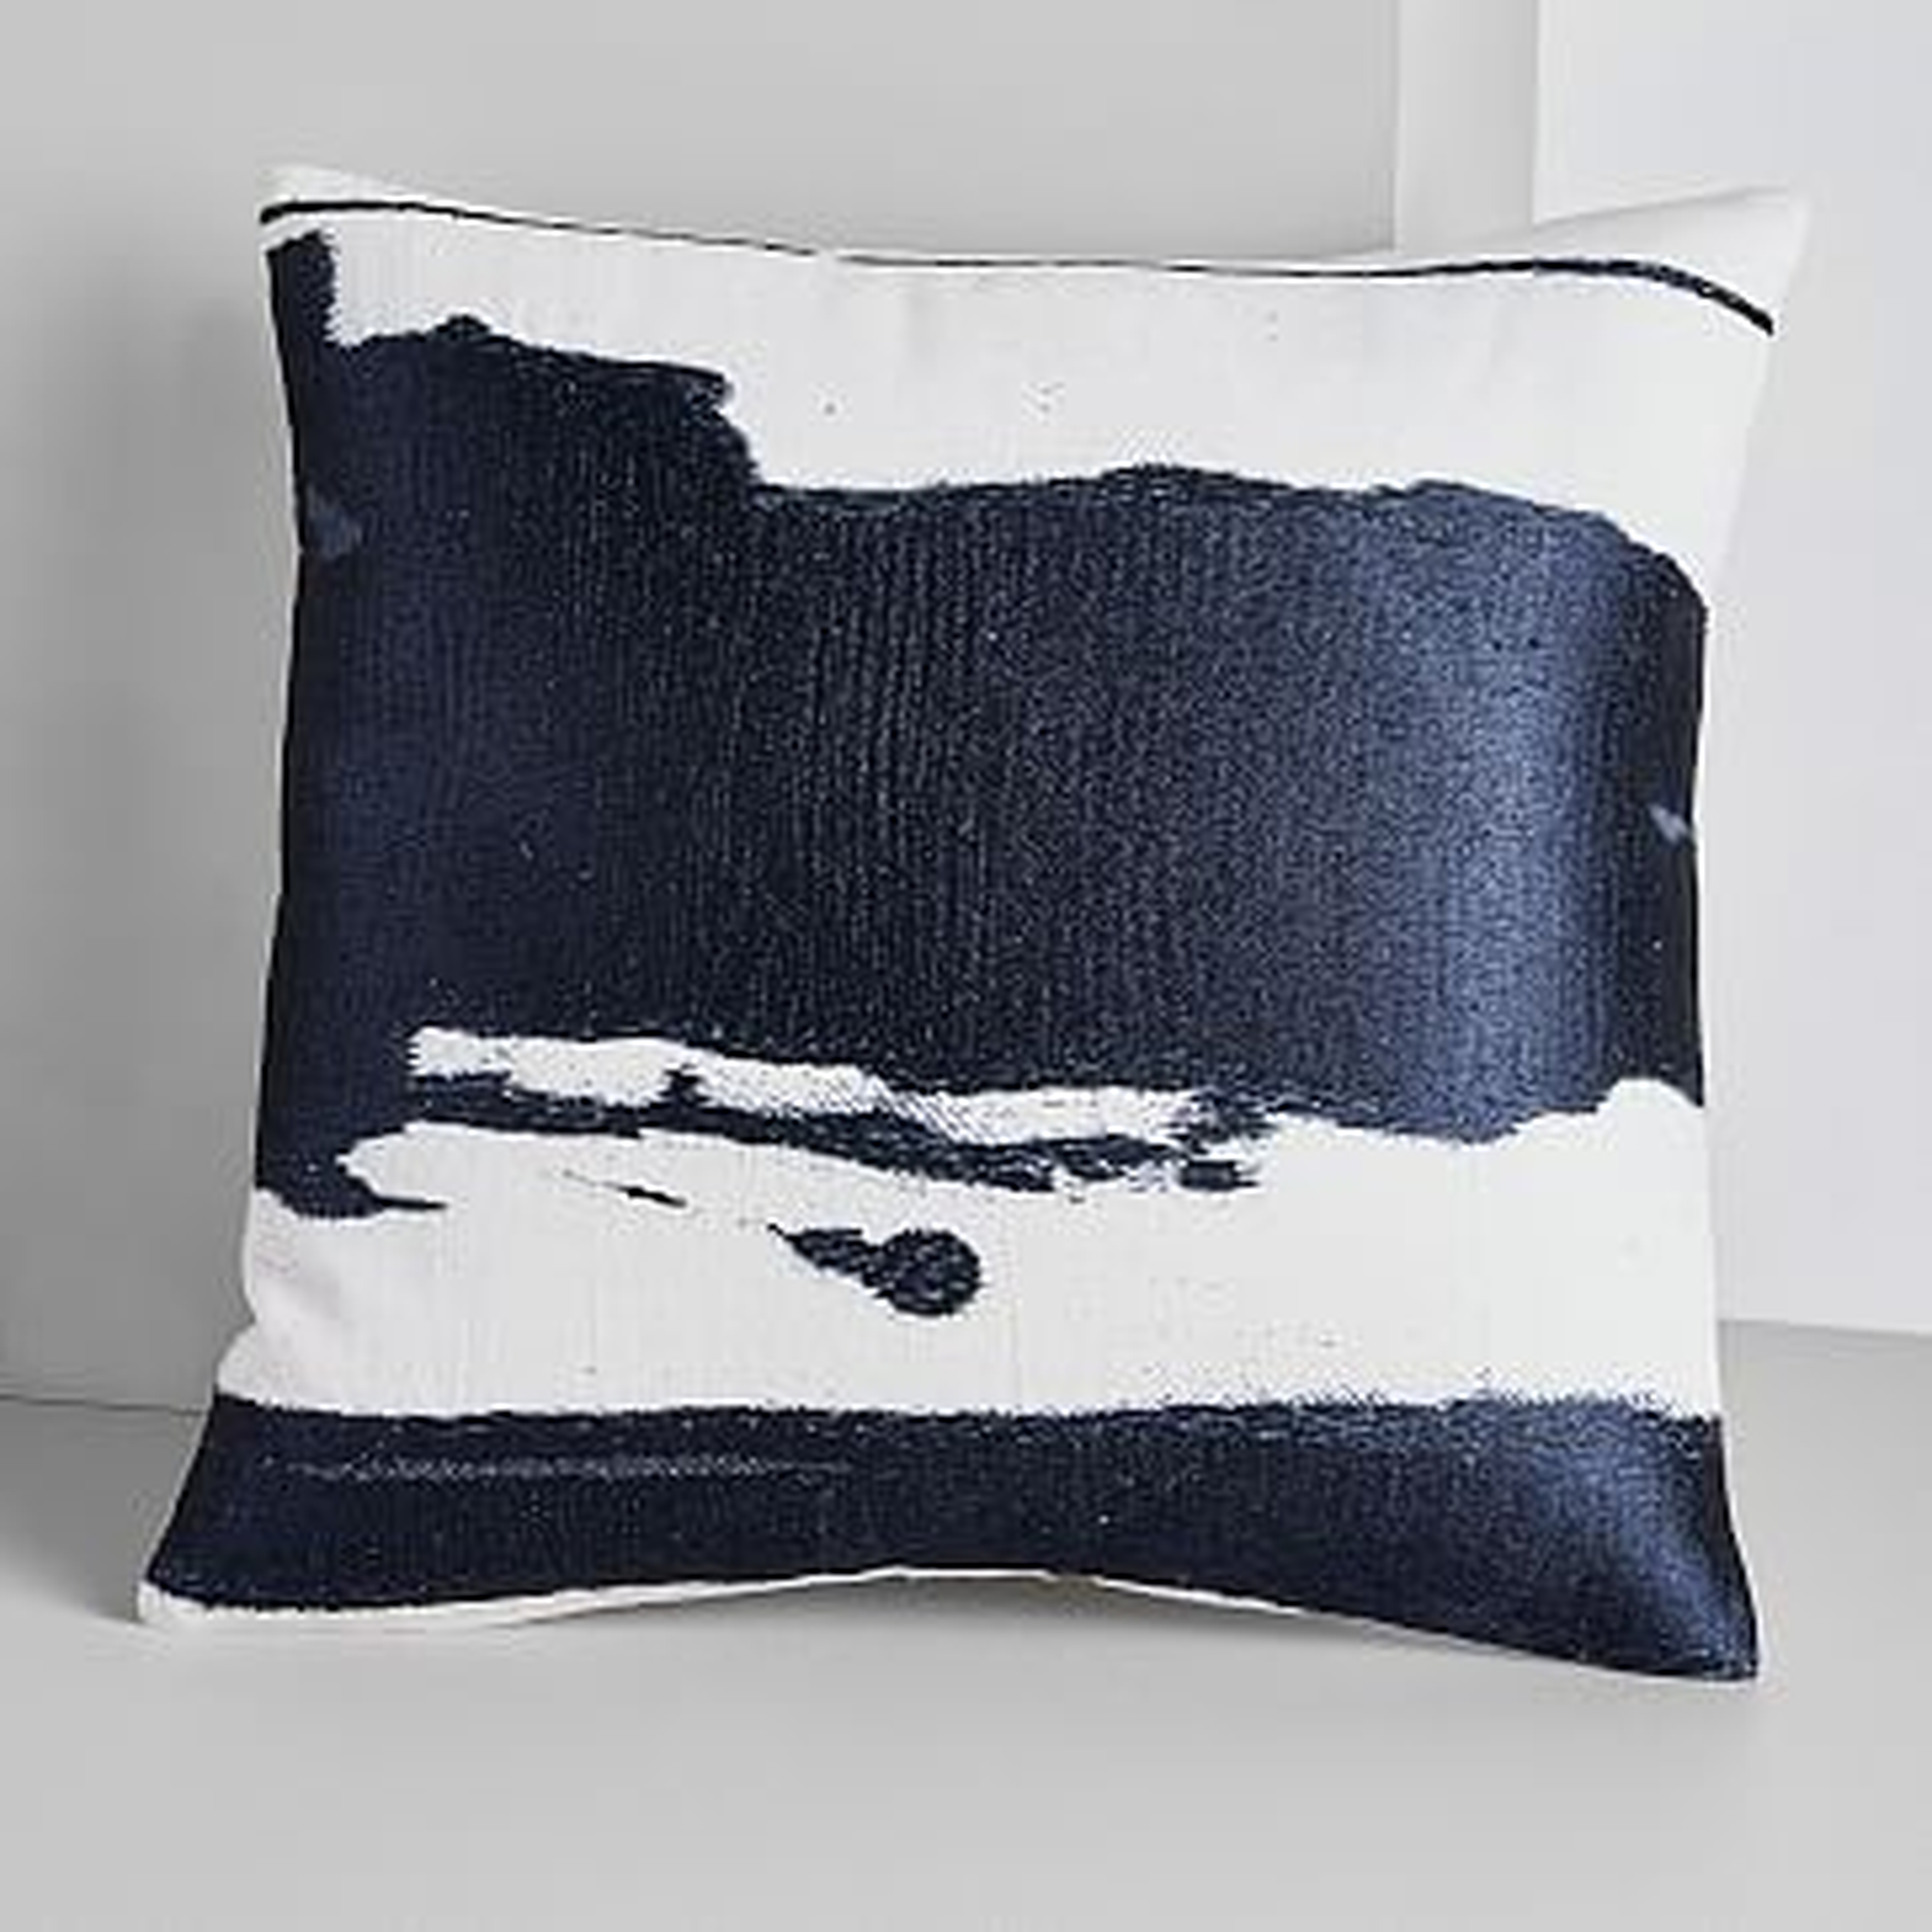 Ink Mural Pillow Cover, Midnight, 20"x20" - West Elm